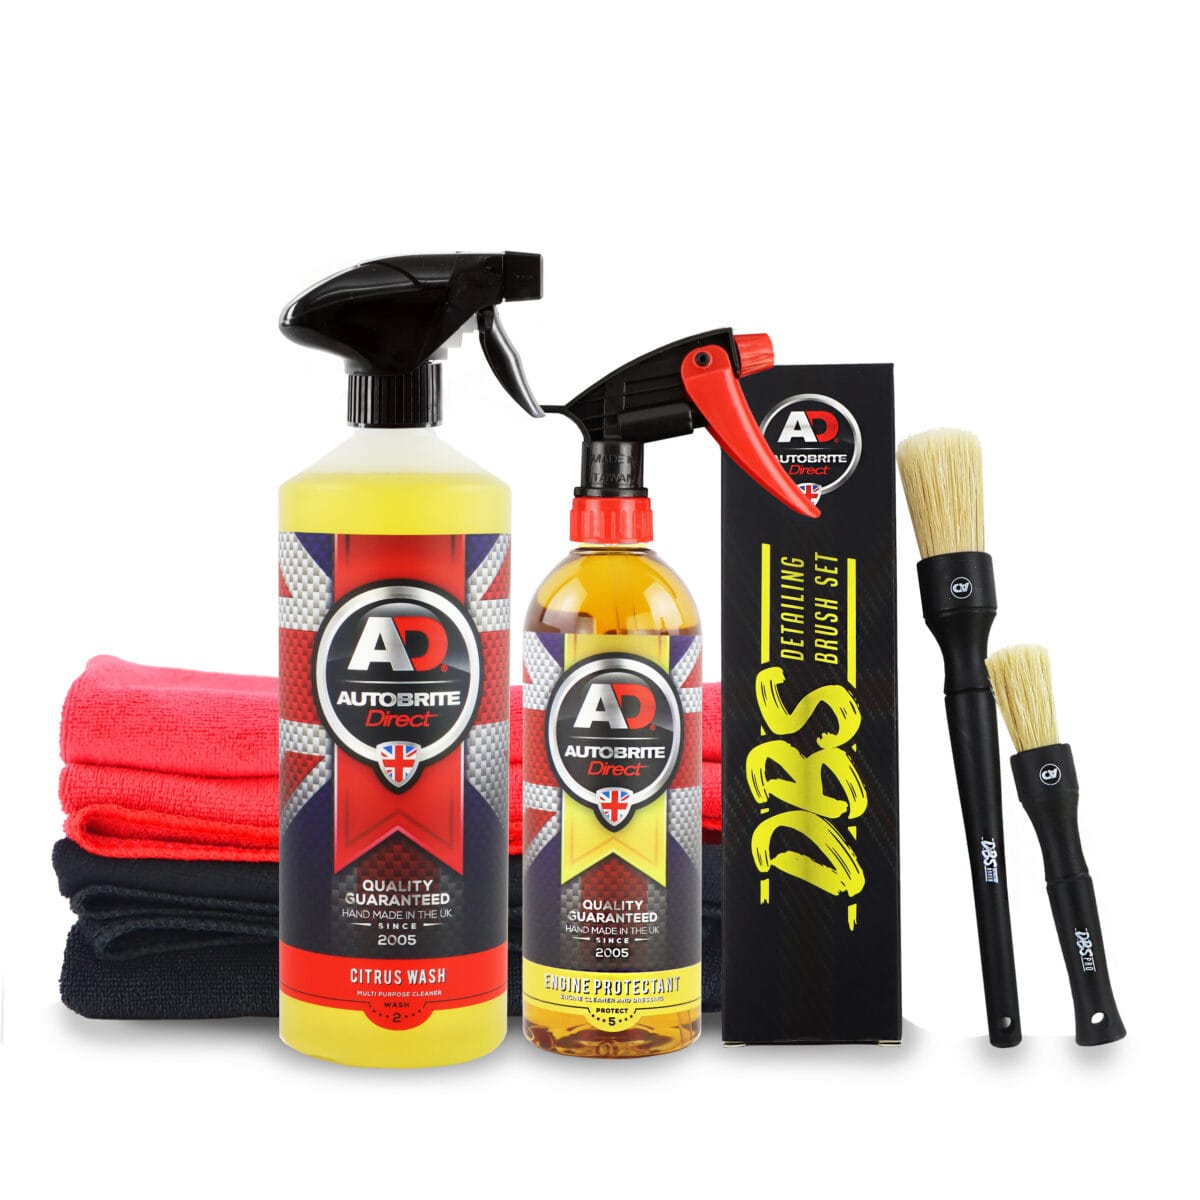 Engine cleaning and protect kit